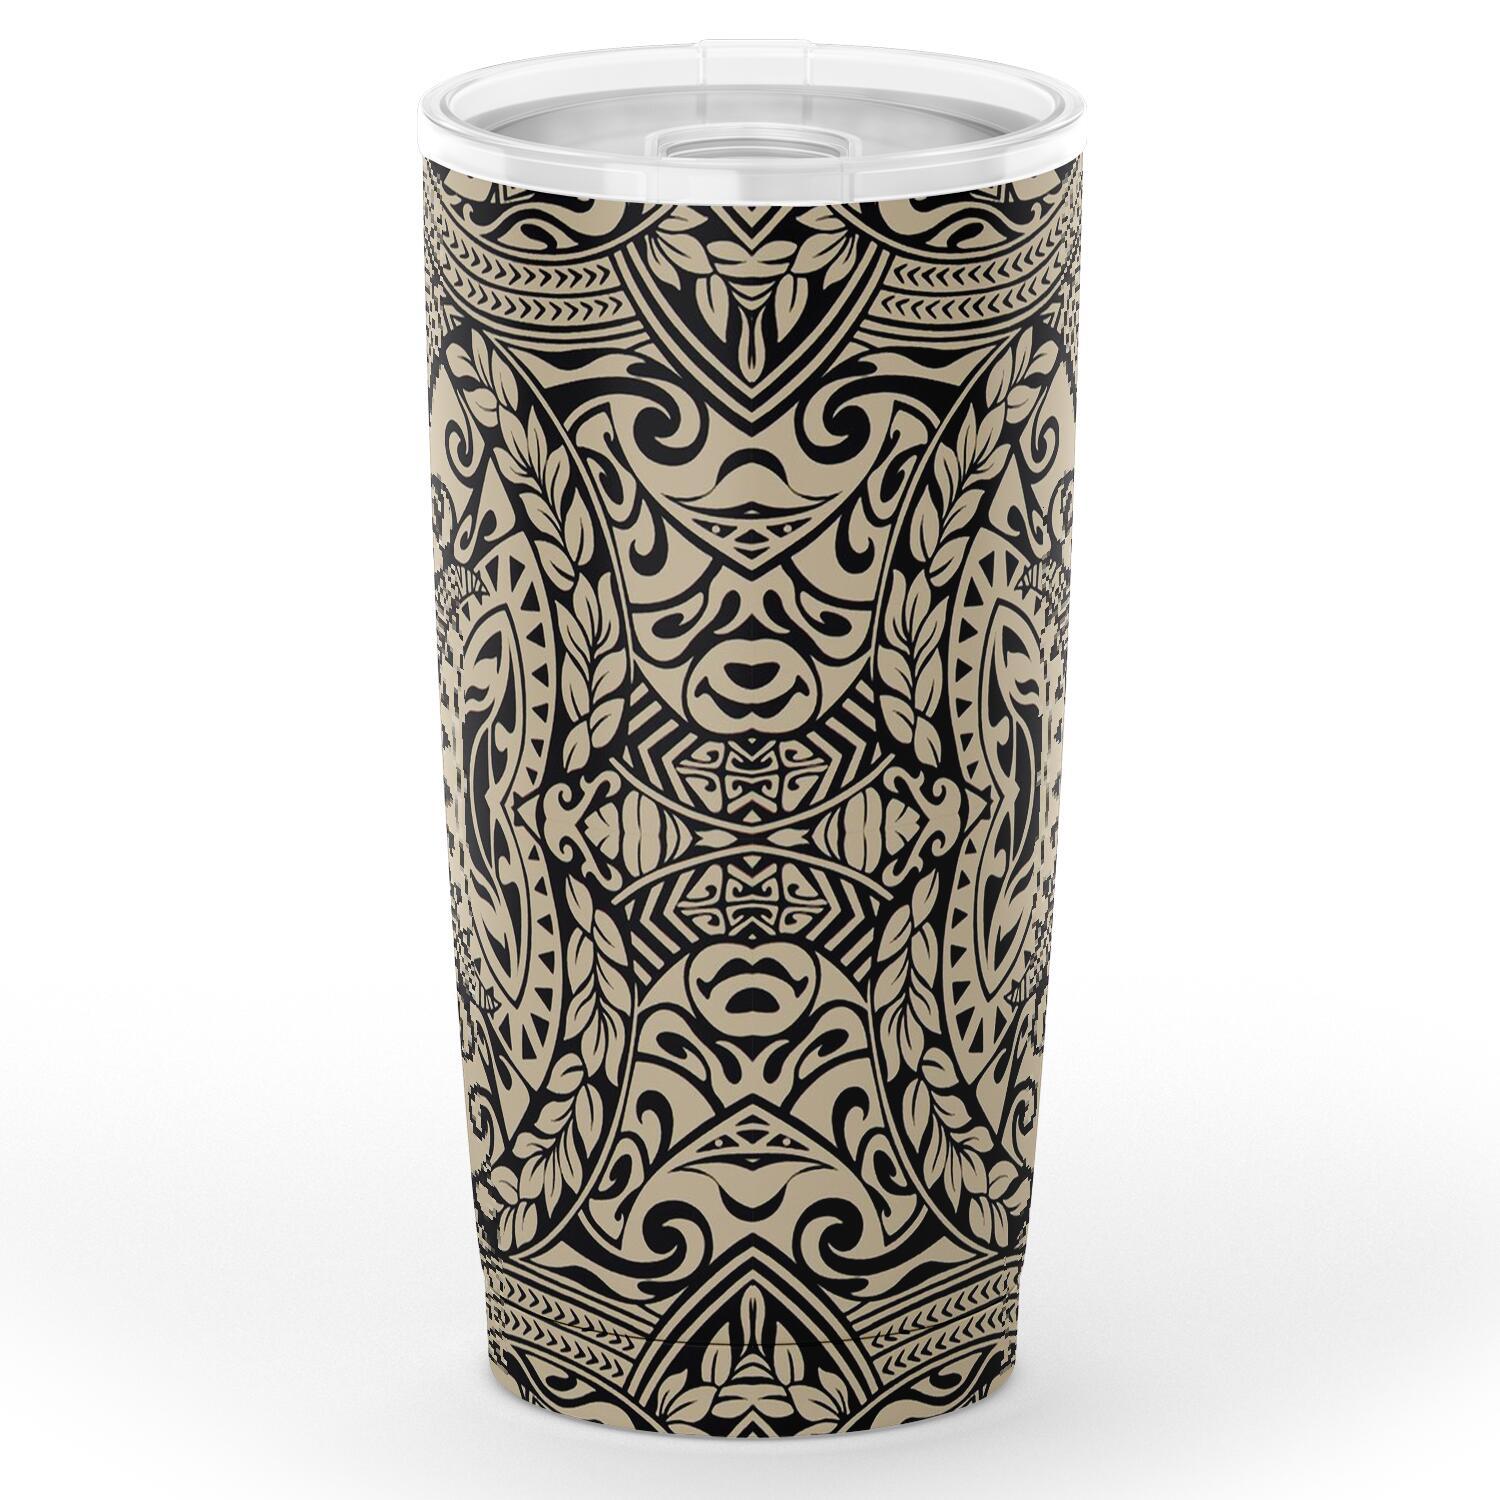 Hawaii Polynesian Culture Old Tumbler 20oz Gold Stainless Steel - Polynesian Pride